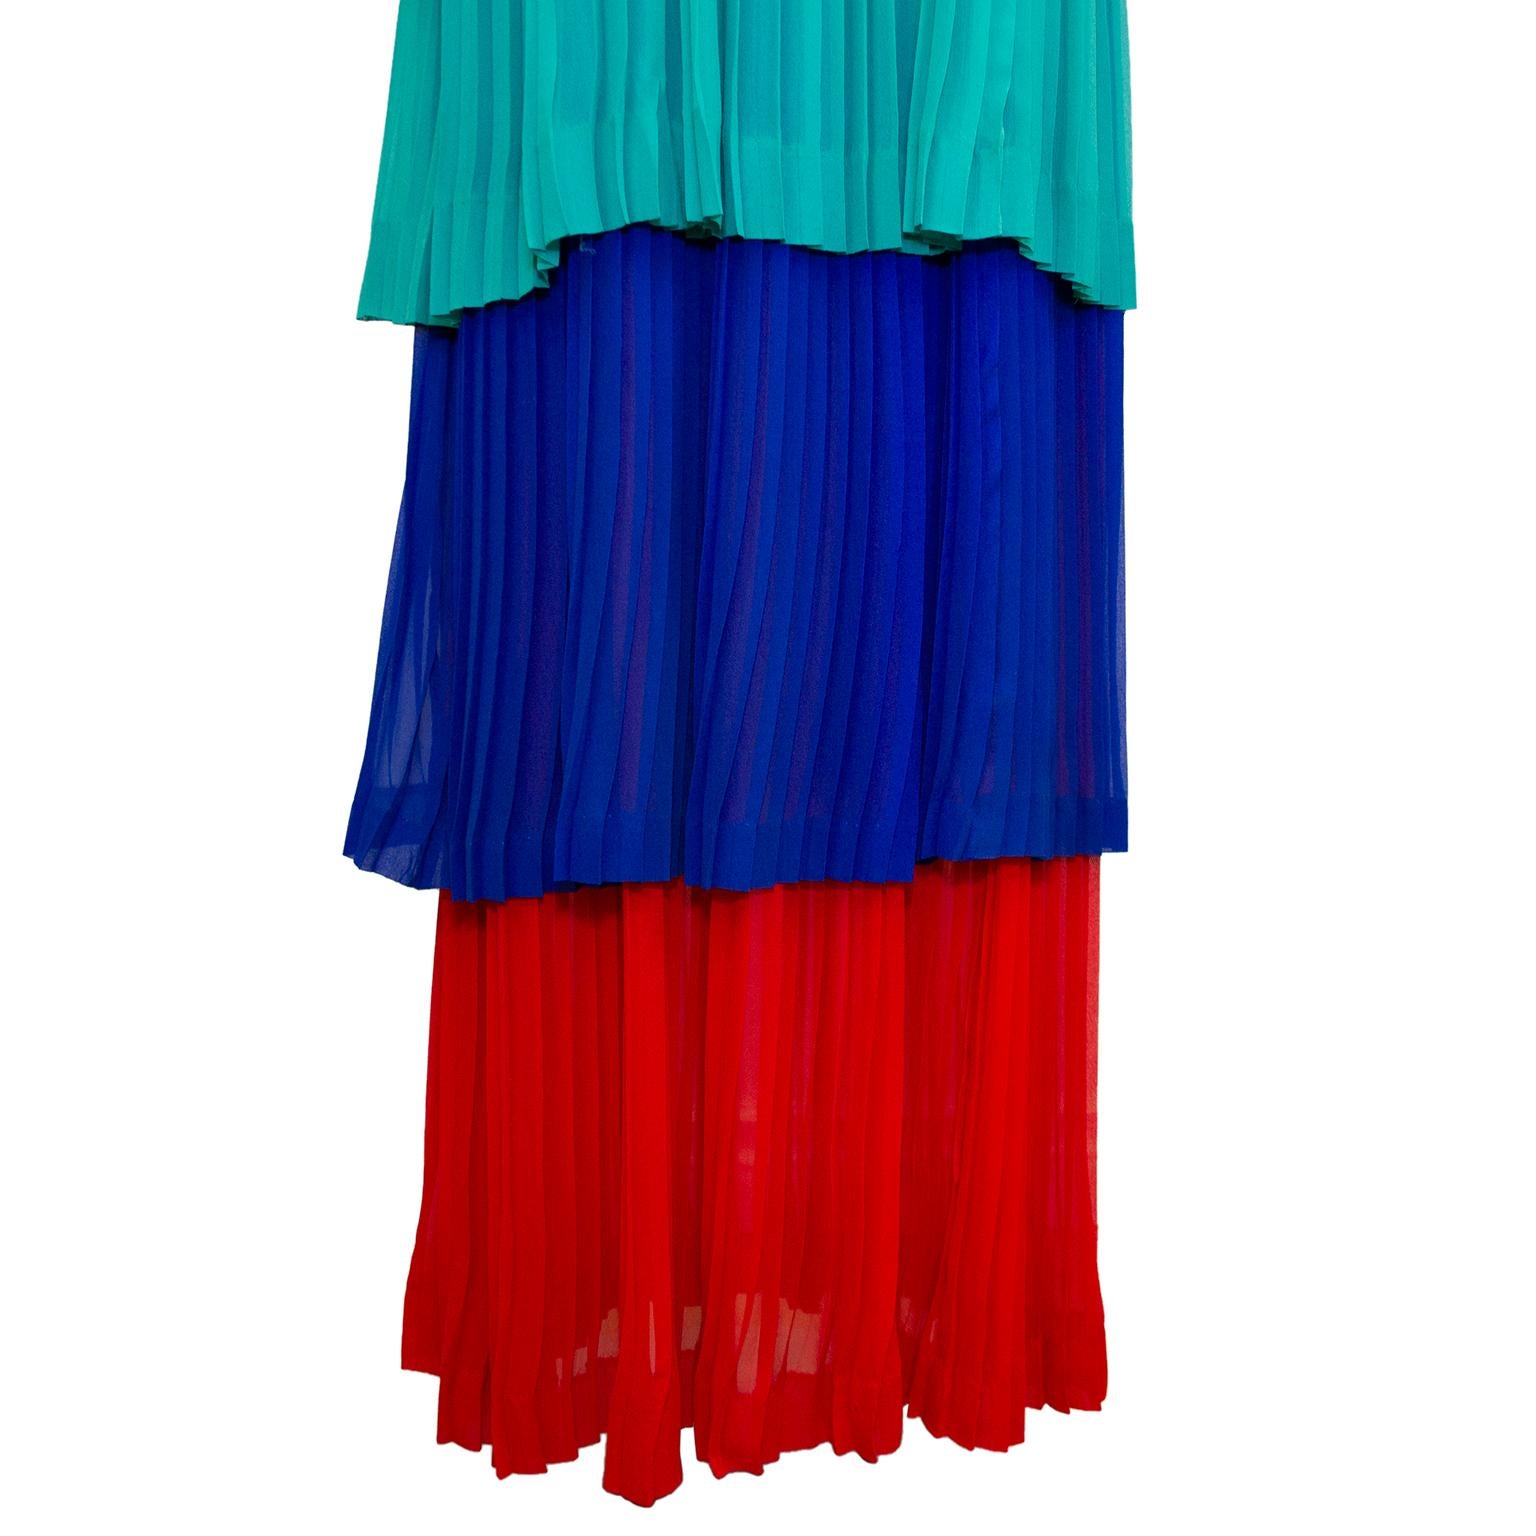 1978 Yves Saint Laurent Rive Gauche Pleated Tricolor Tiered Chiffon Gown In Good Condition For Sale In Toronto, Ontario